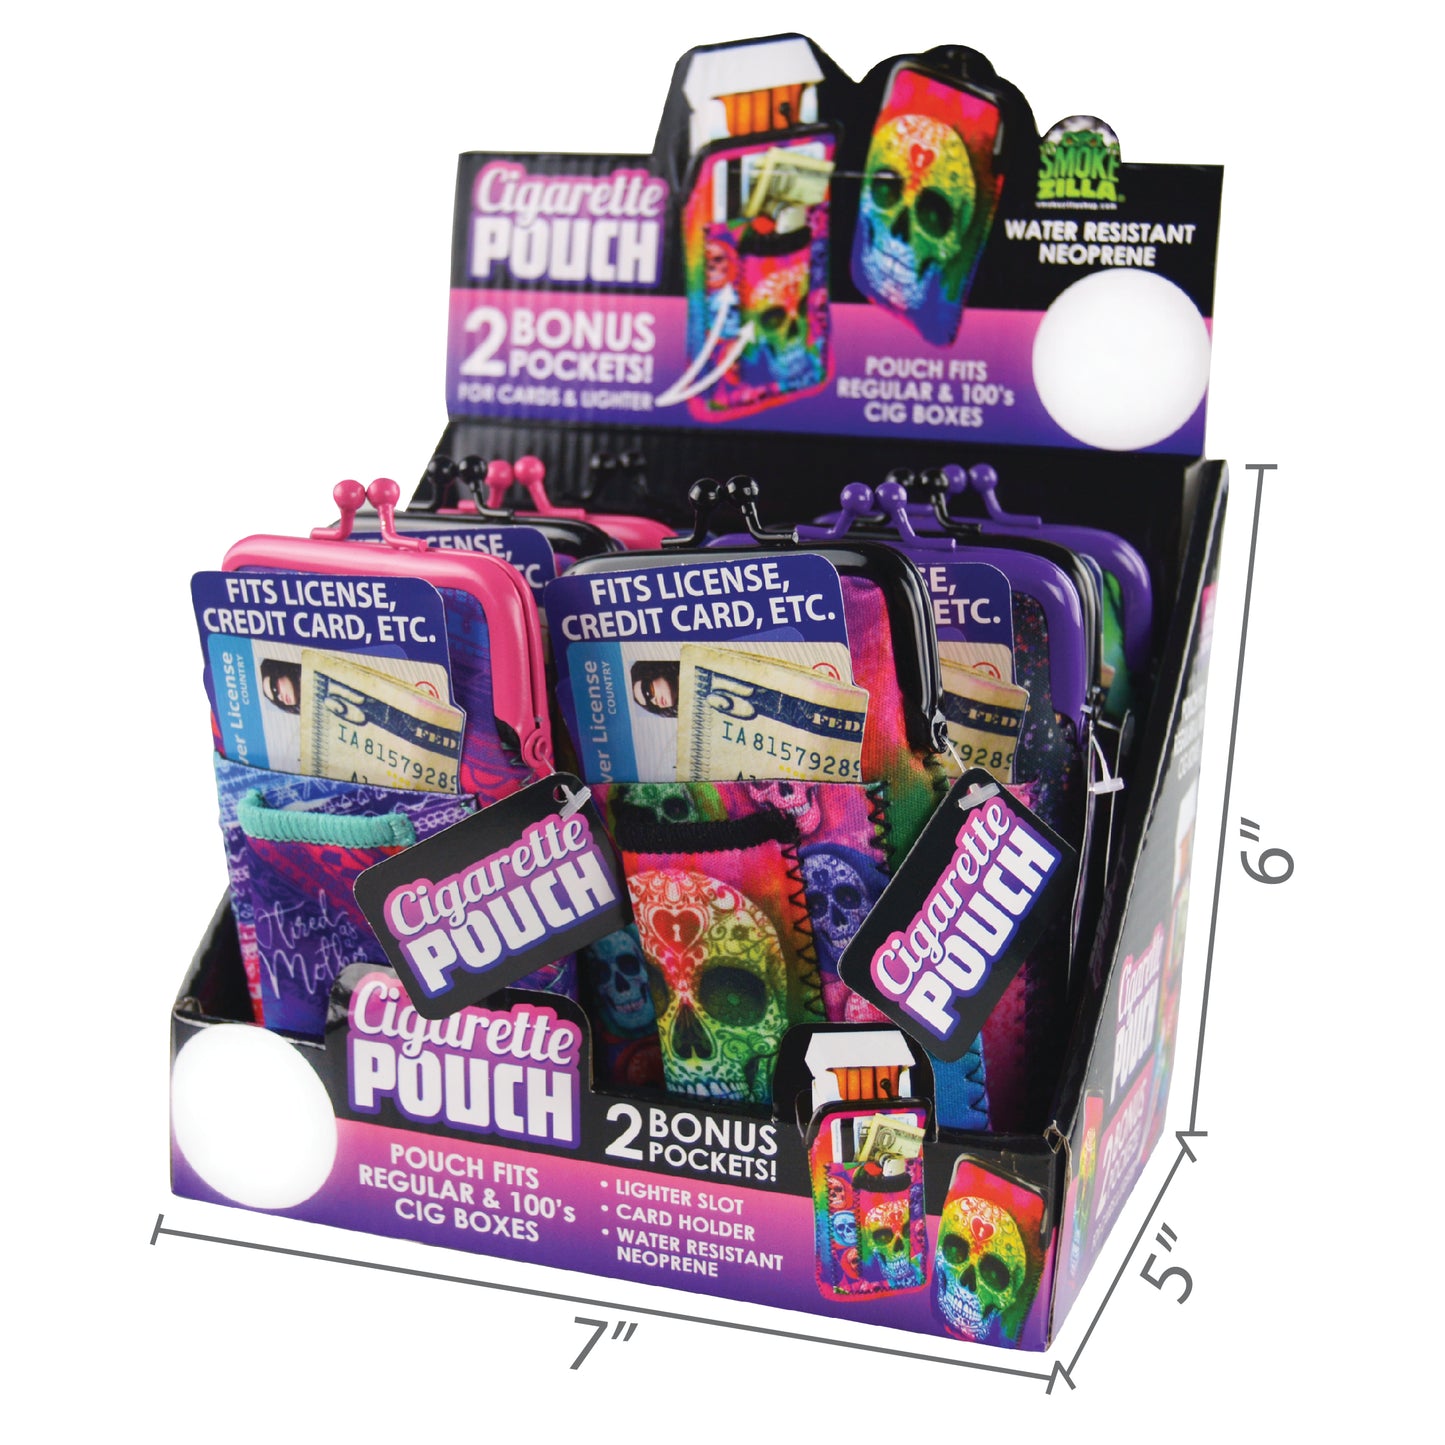 ITEM NUMBER 026661 NEOPRENE CIG POUCH MIX E 8 PIECES PER DISPLAY